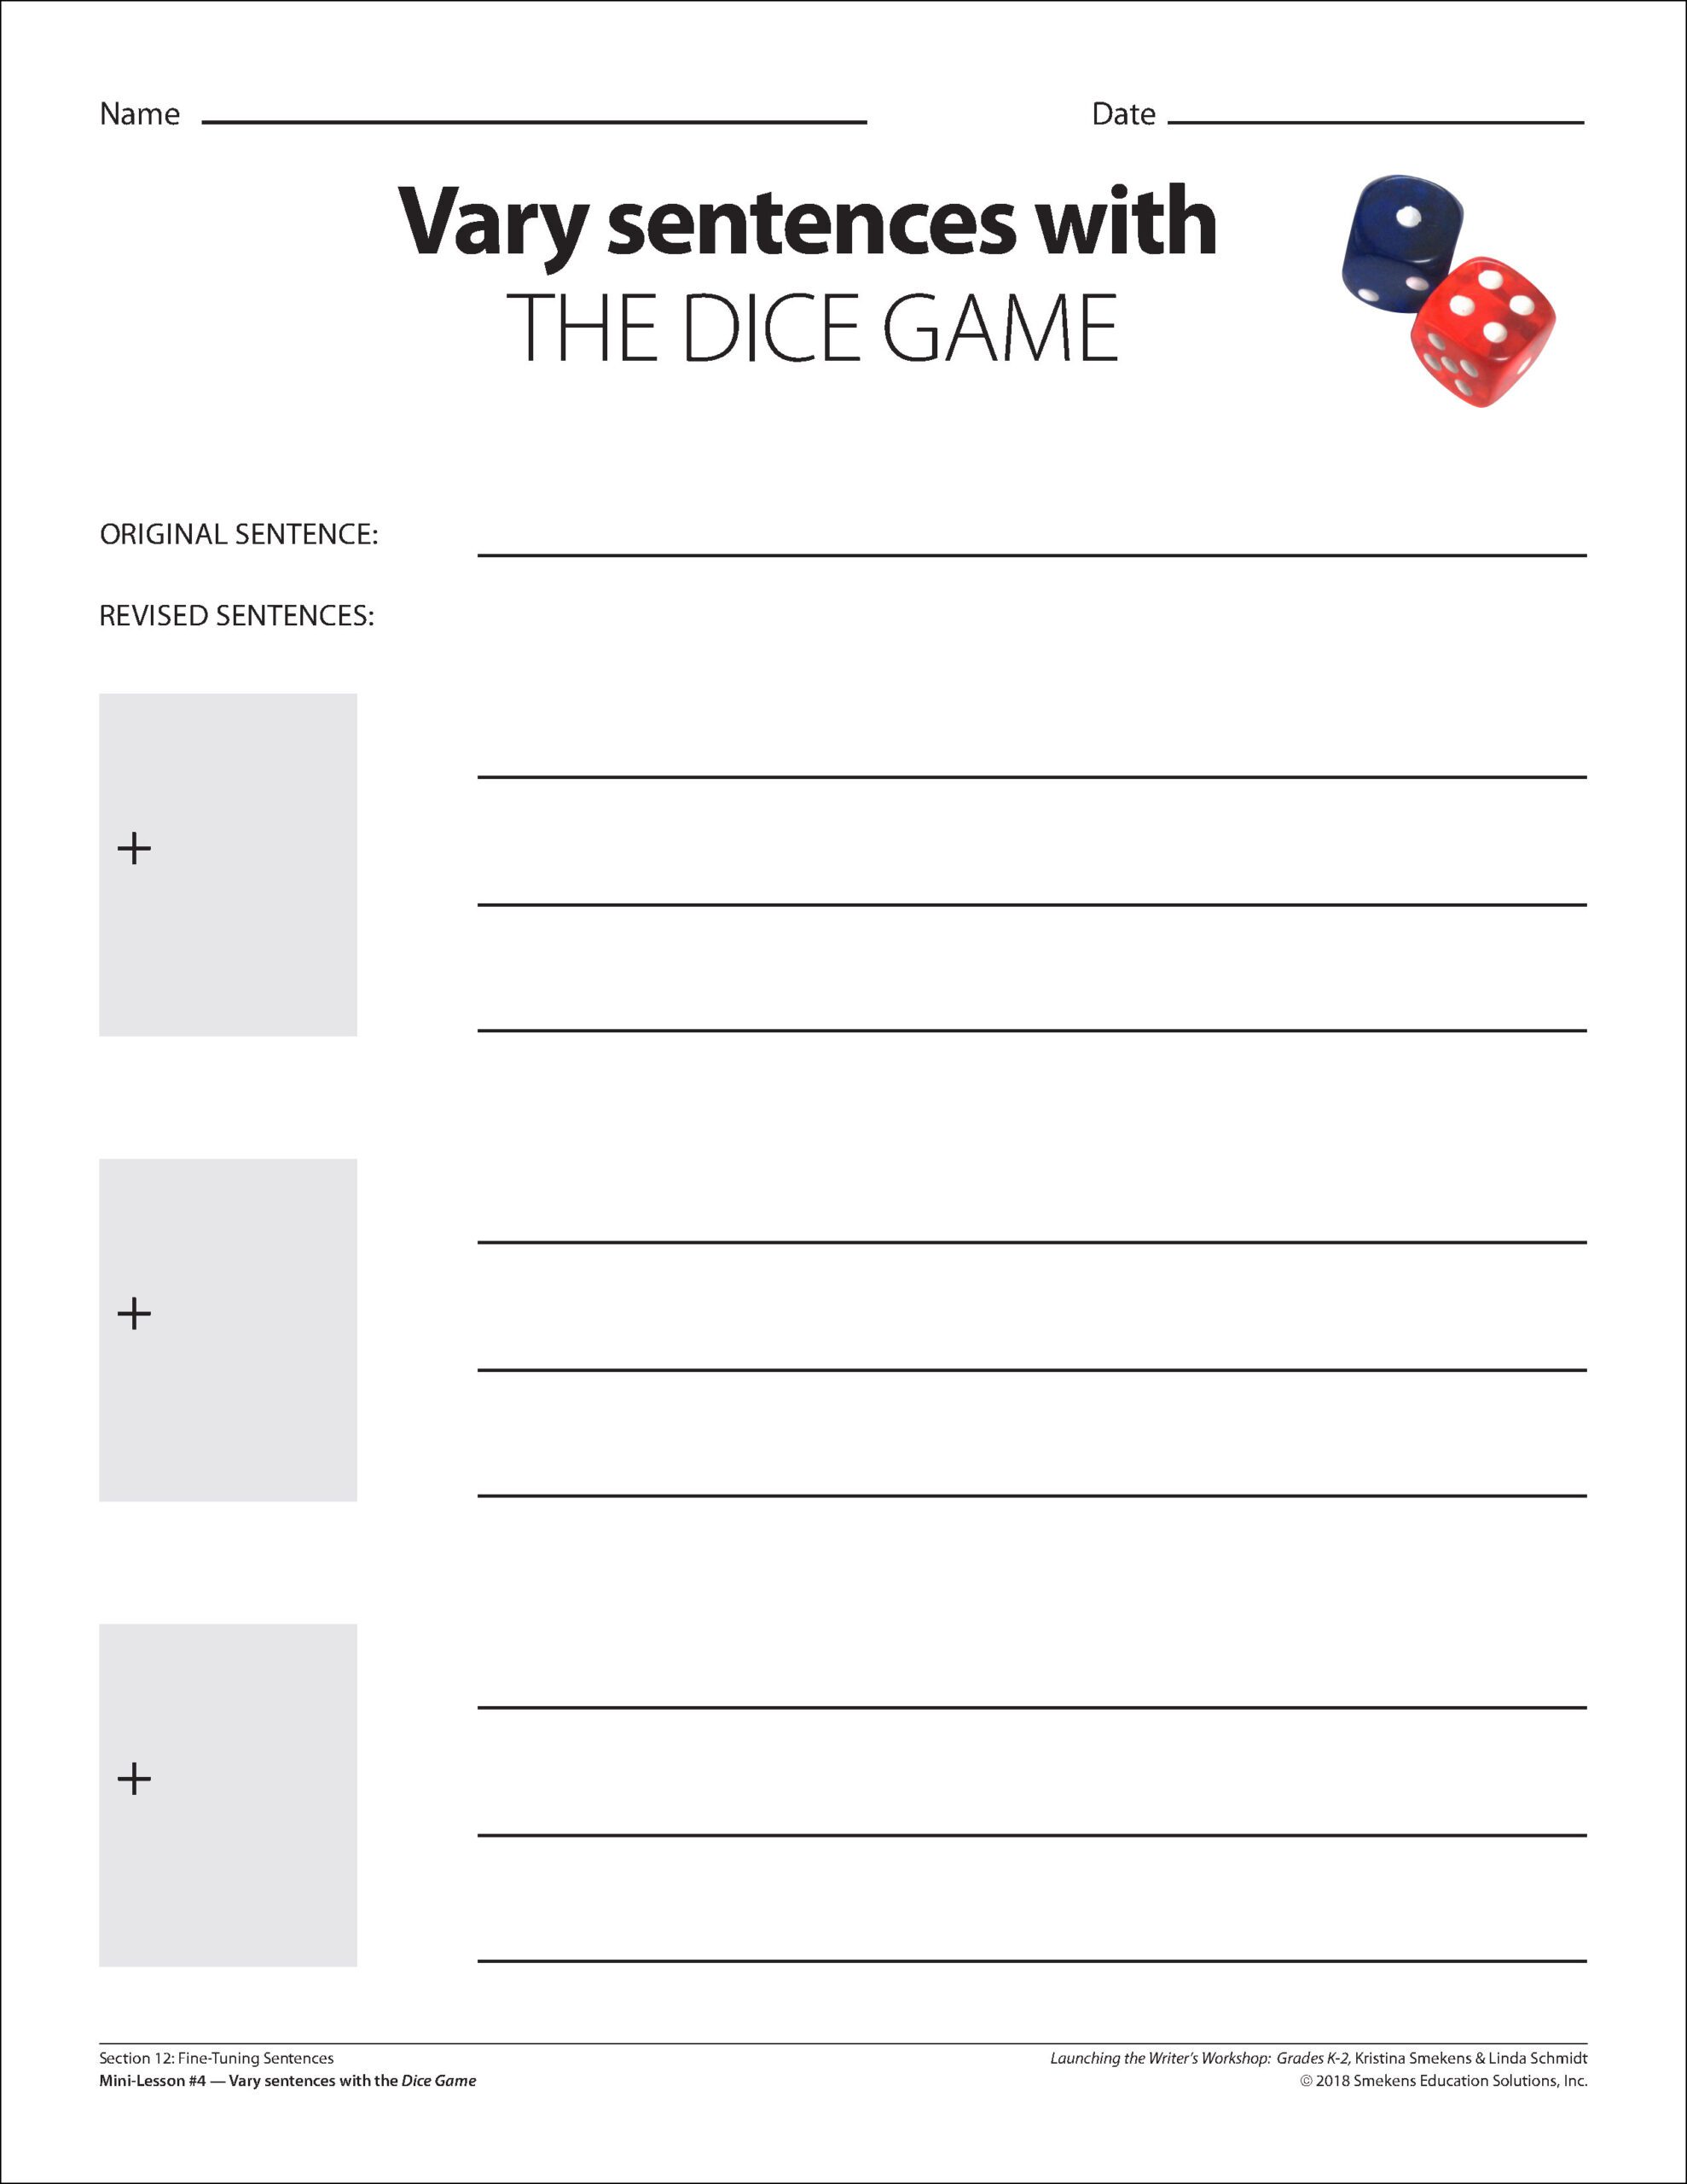 Dice Game - Vary sentence length - Student Handout